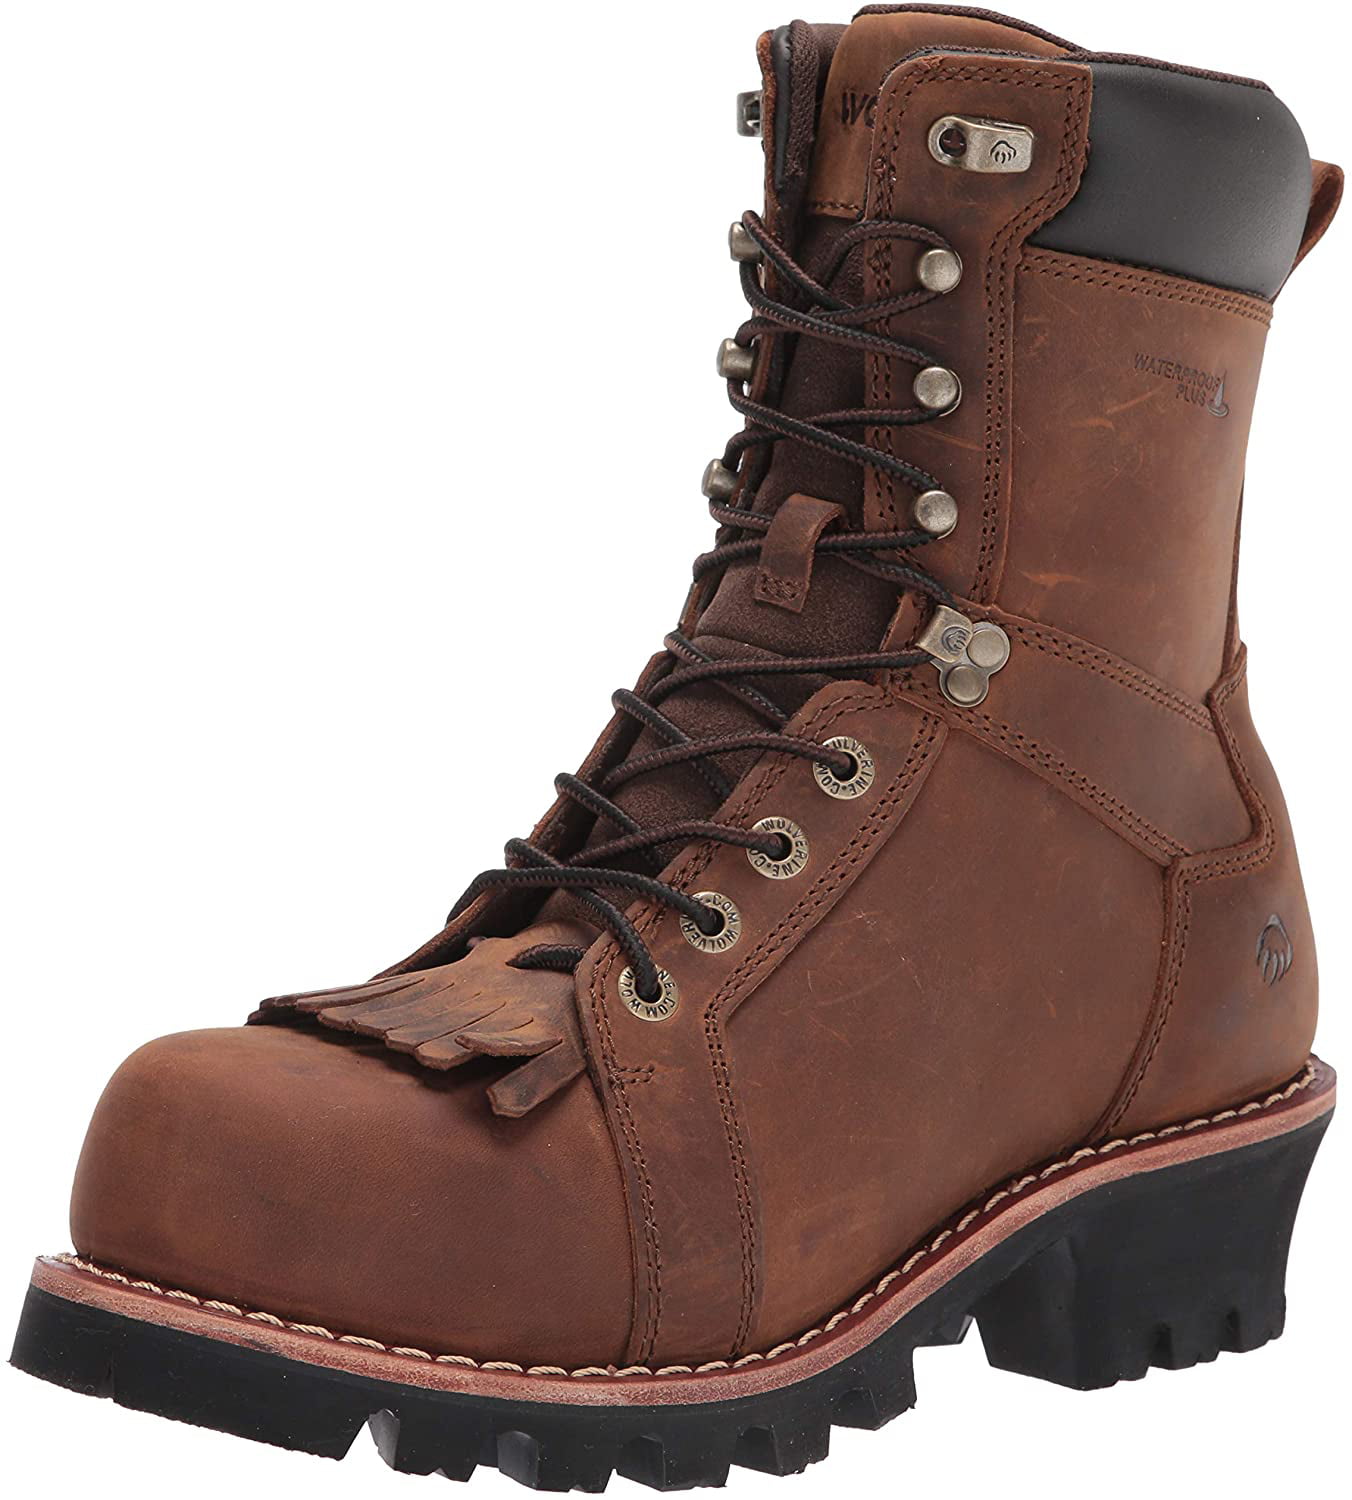 Wolverine Mens Logger CarbonMax 8 Boot Construction 